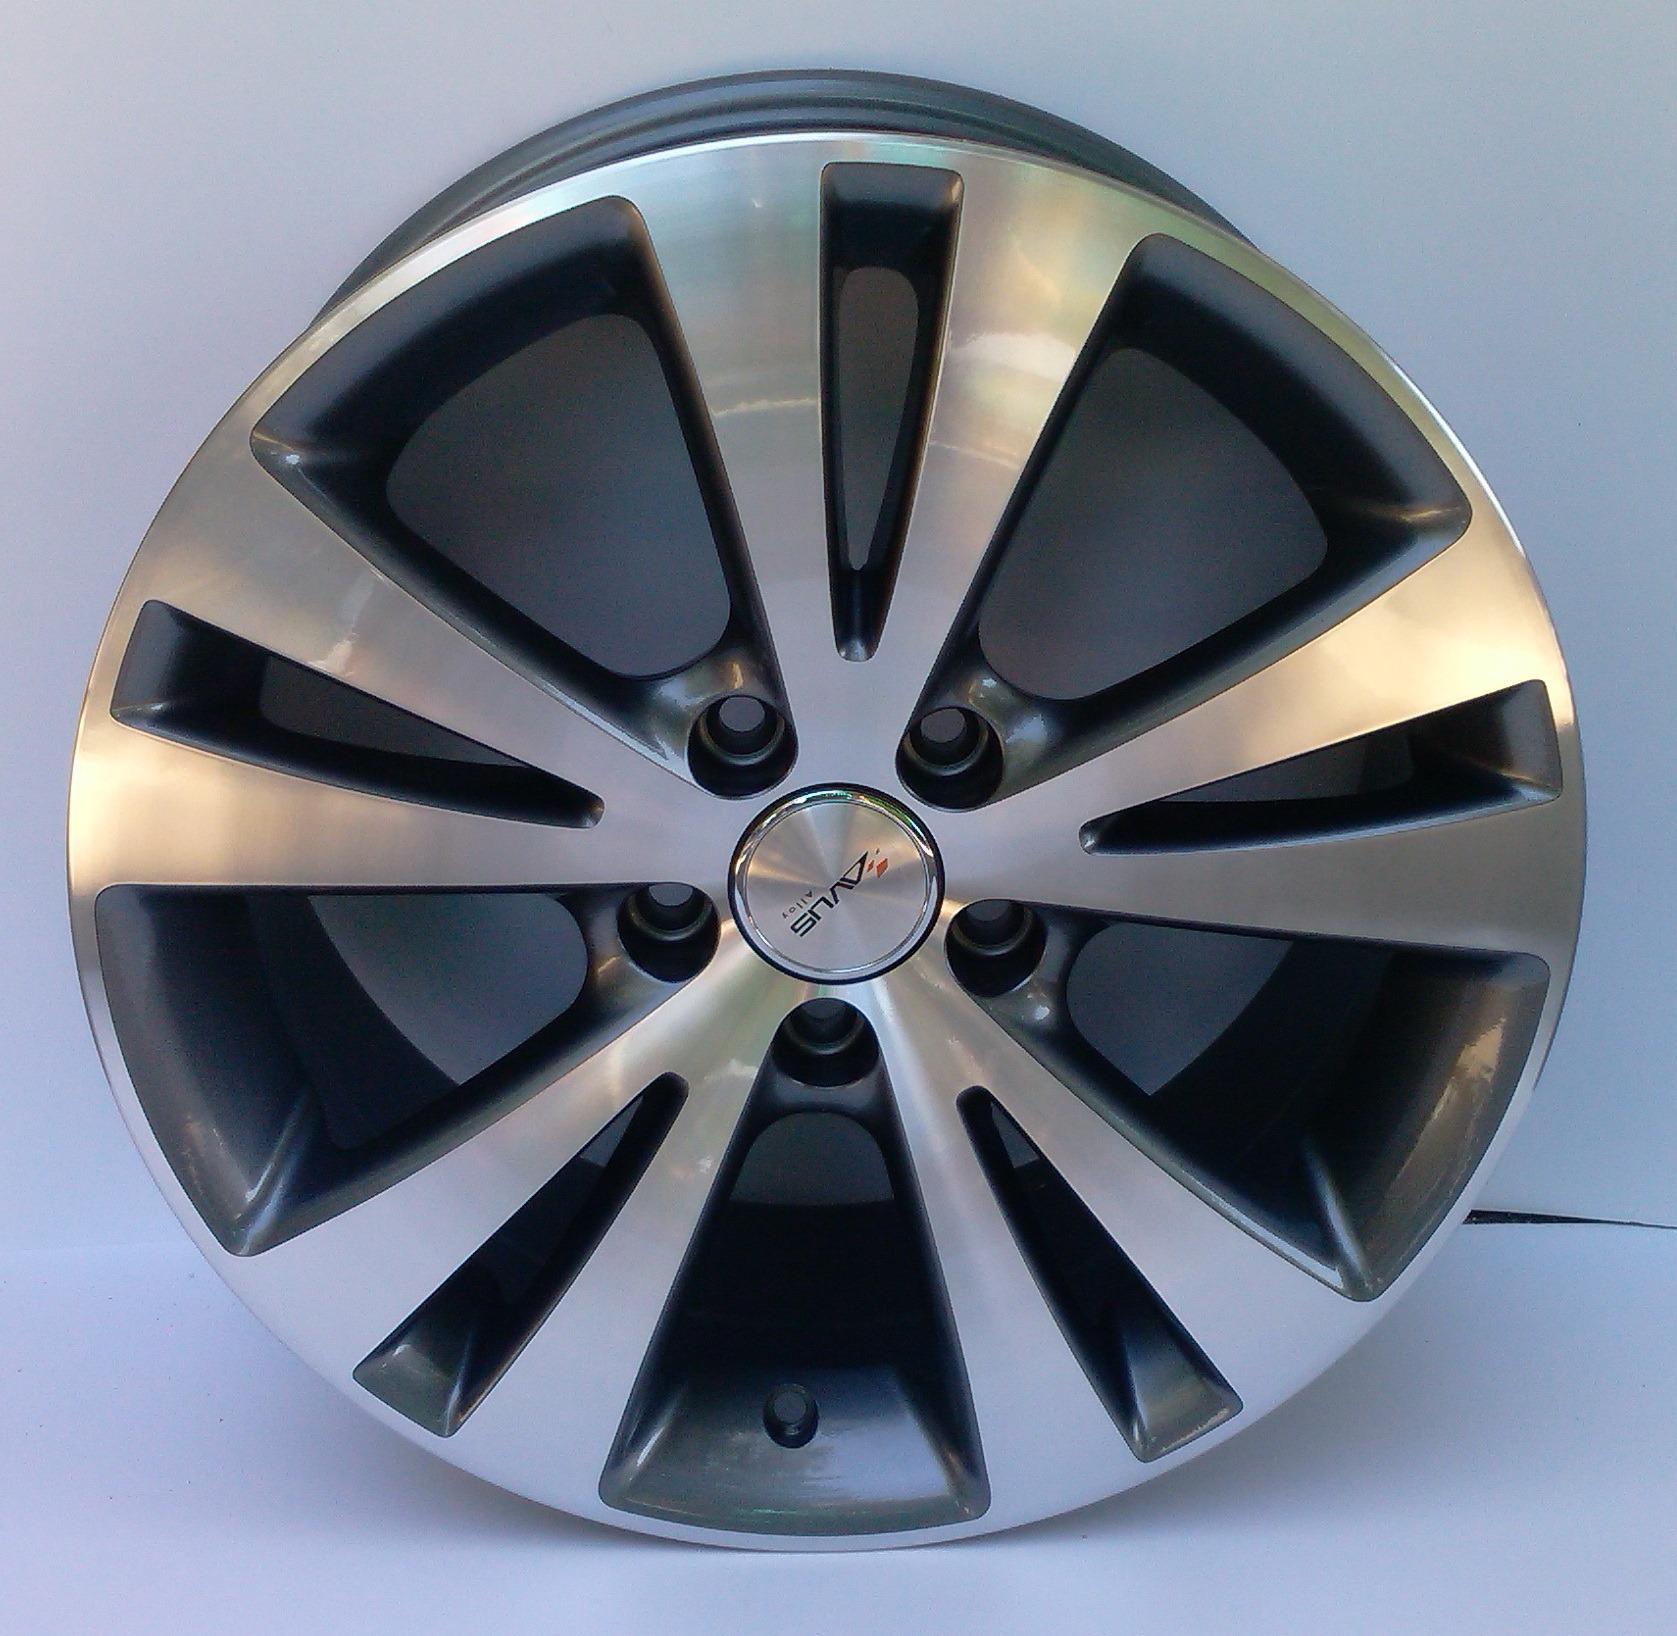 F334 7.5x17 5x112 ET47 DIA 57.1 ANTHRACITE POLISHED